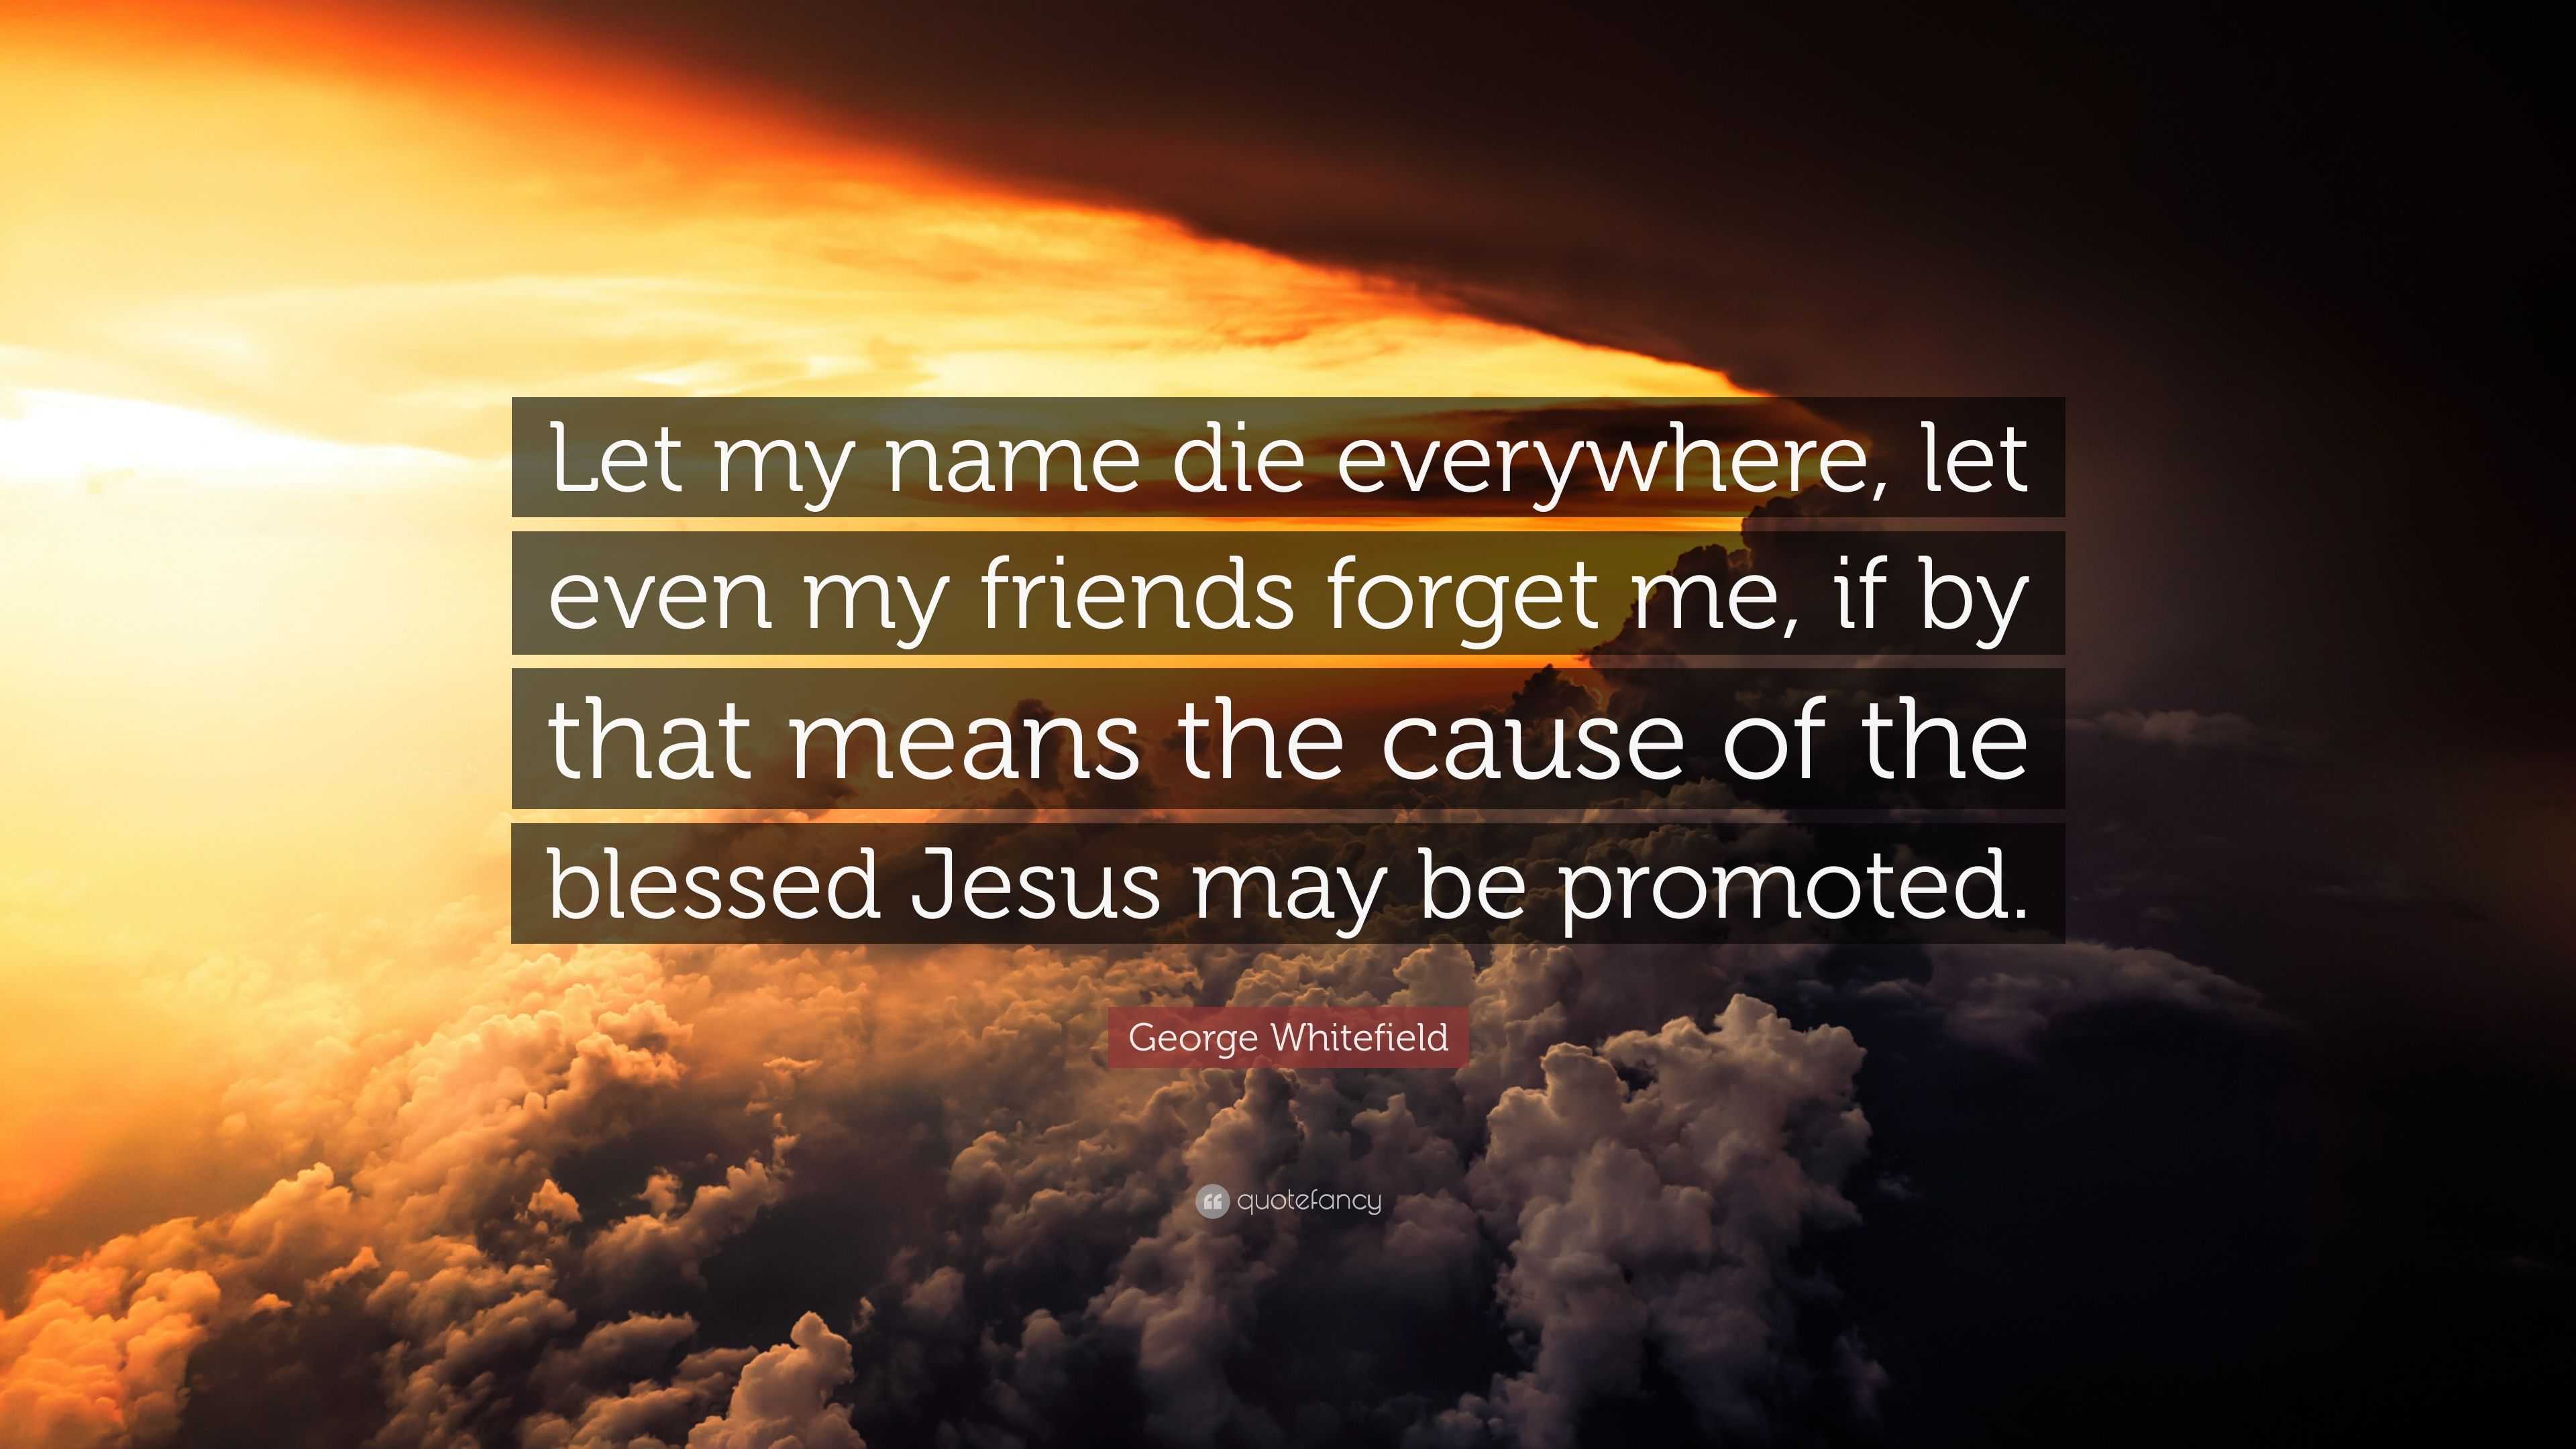 George Whitefield Quote: “Let my name die everywhere, let even my